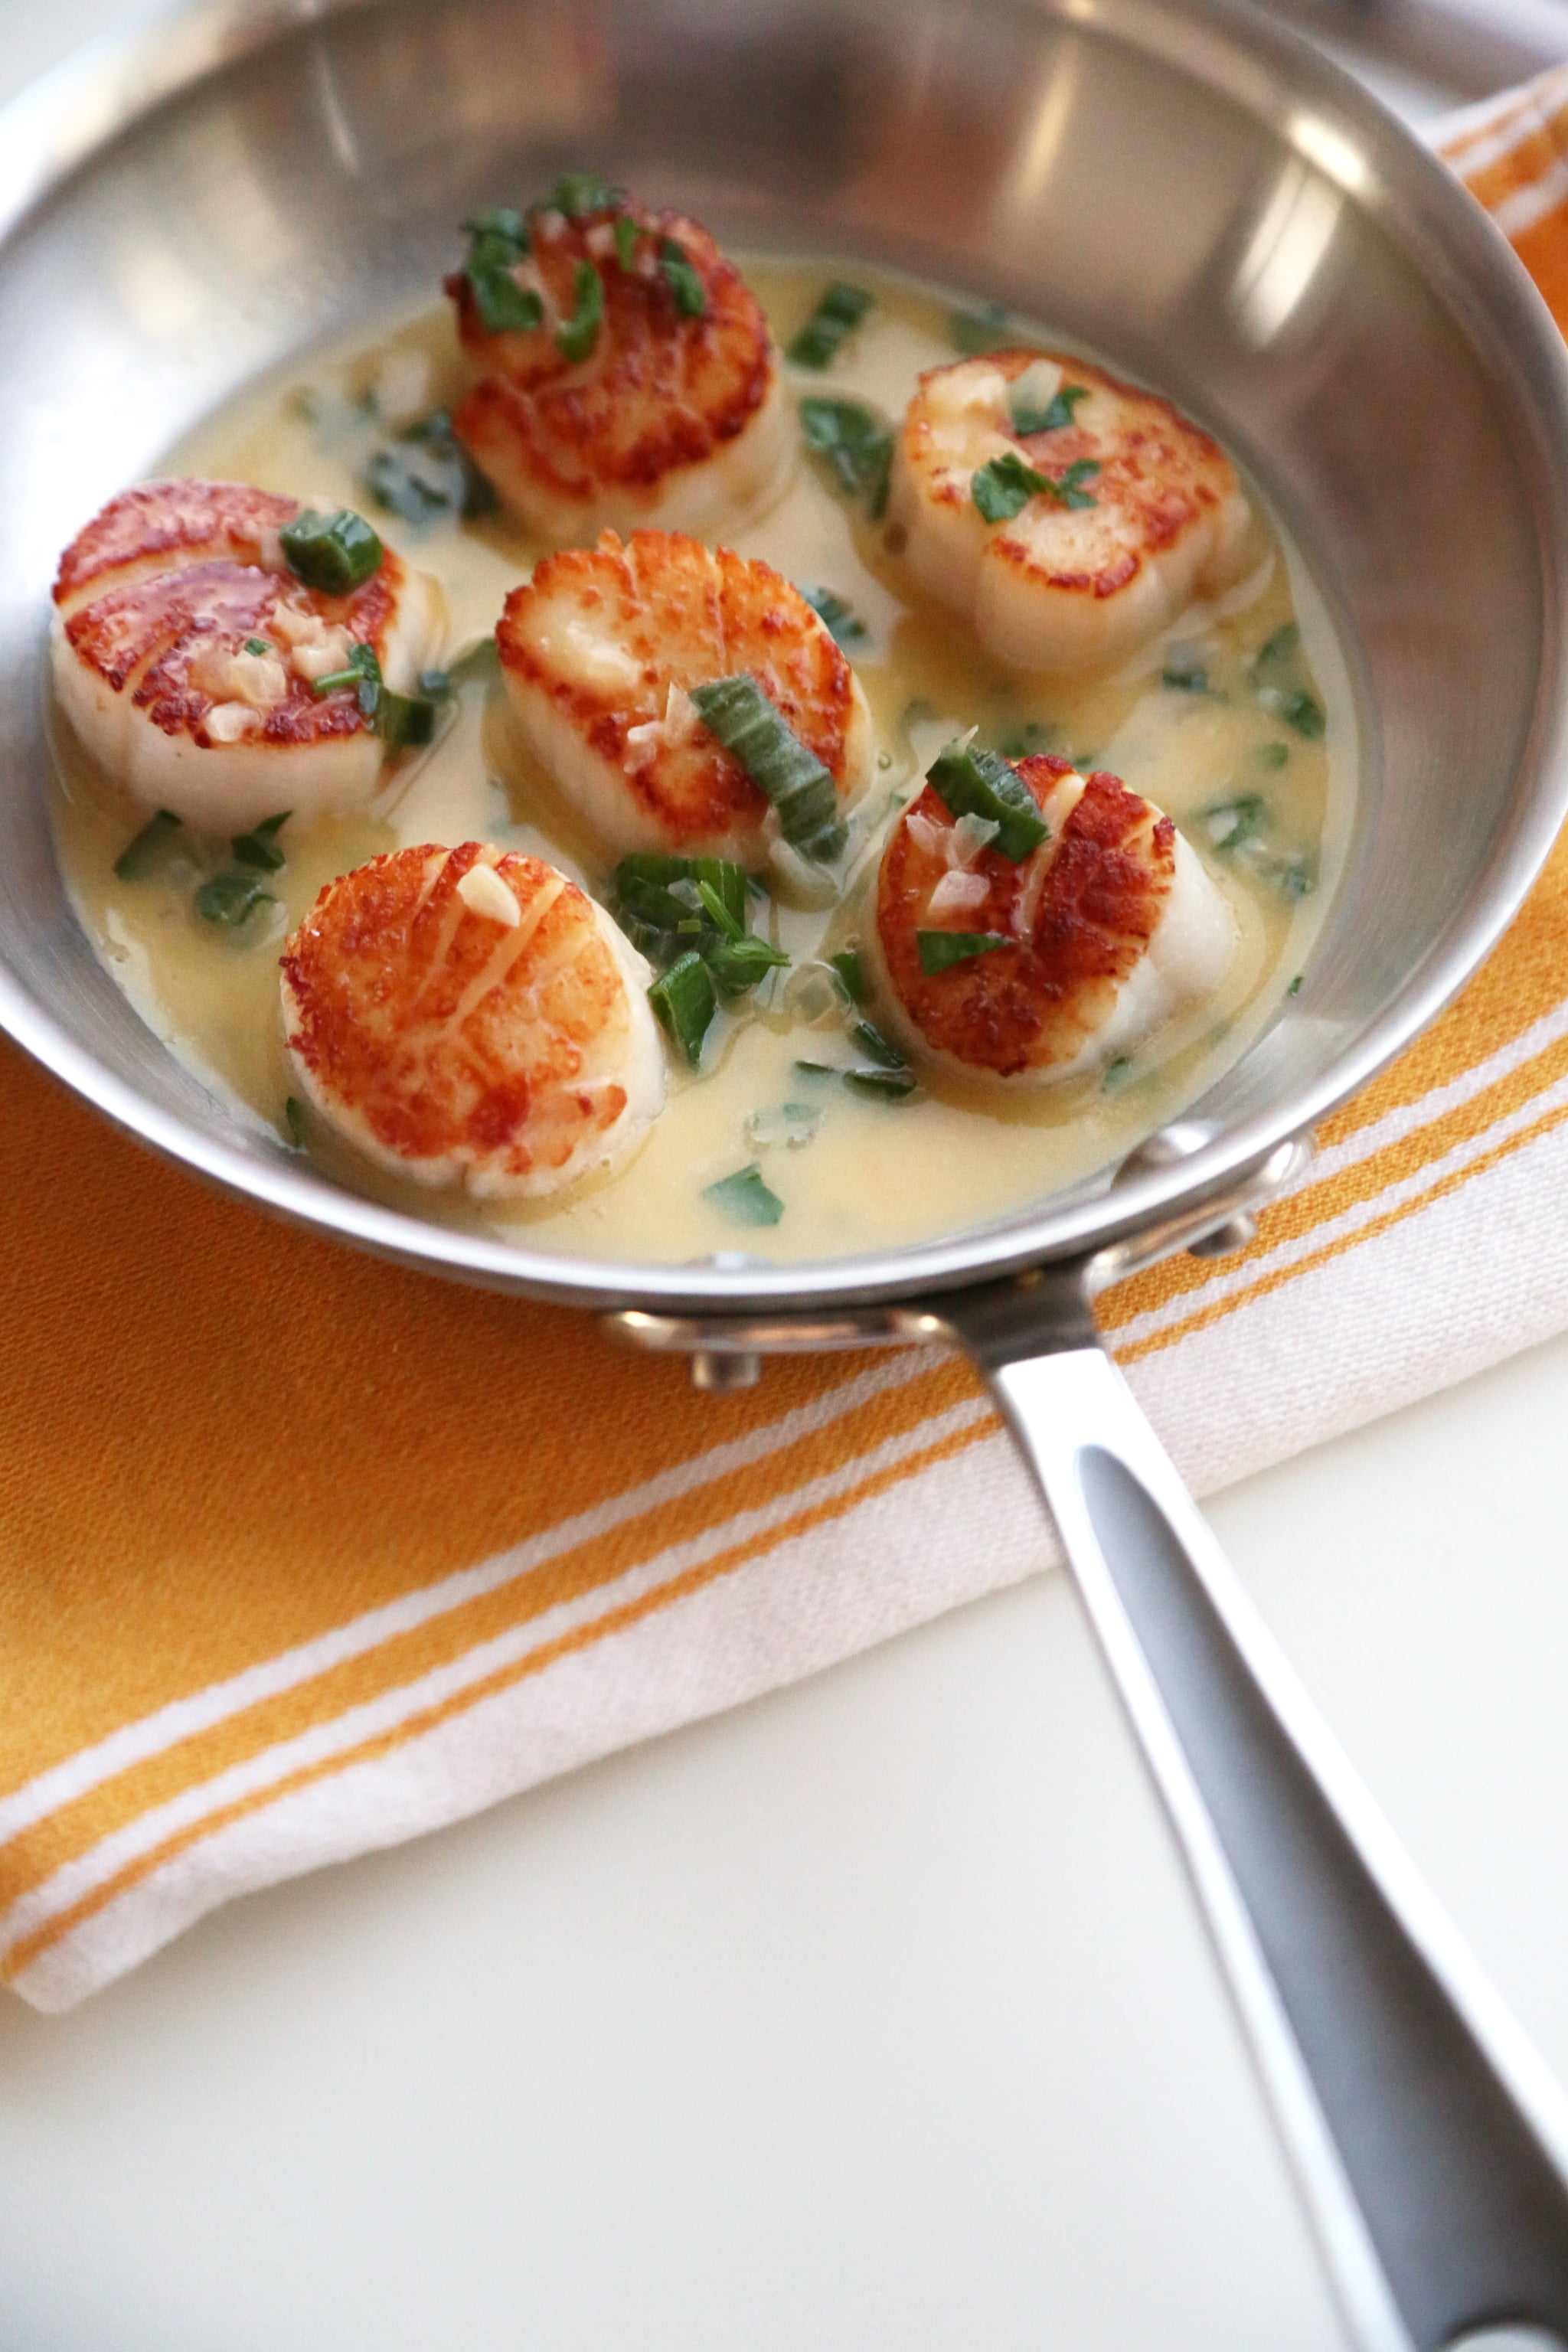 Seared Scallops in White Wine Butter Sauce | //homemaderecipes.com/healthy/dinner/12-scallop-recipes/